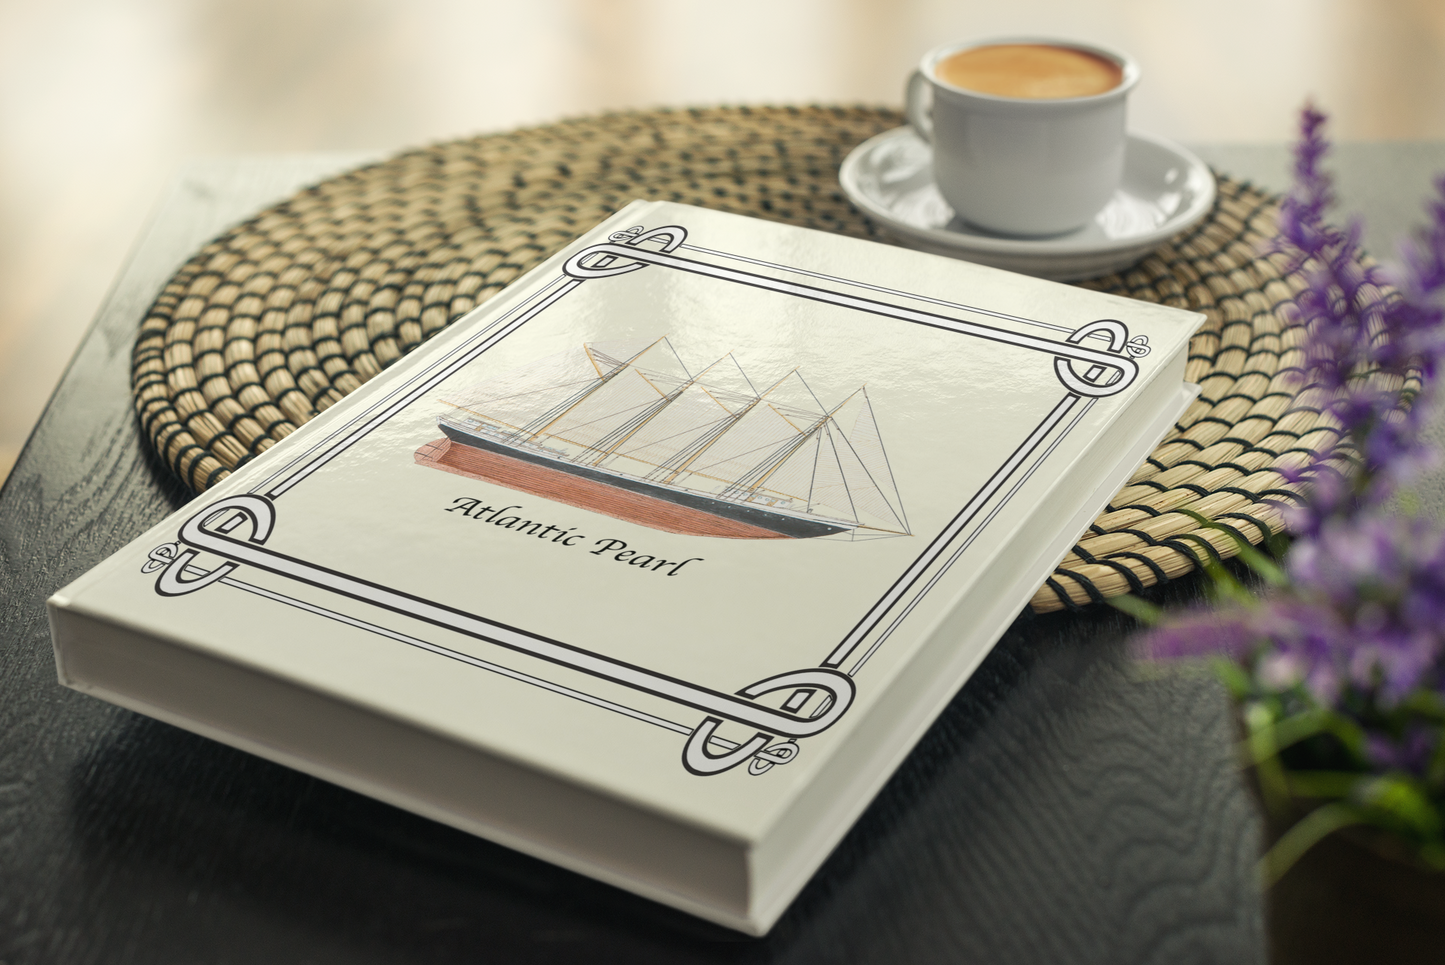 The Atlantic Pearl Lined Page Journal will keep your notes on all of your sailing adventures and travels.